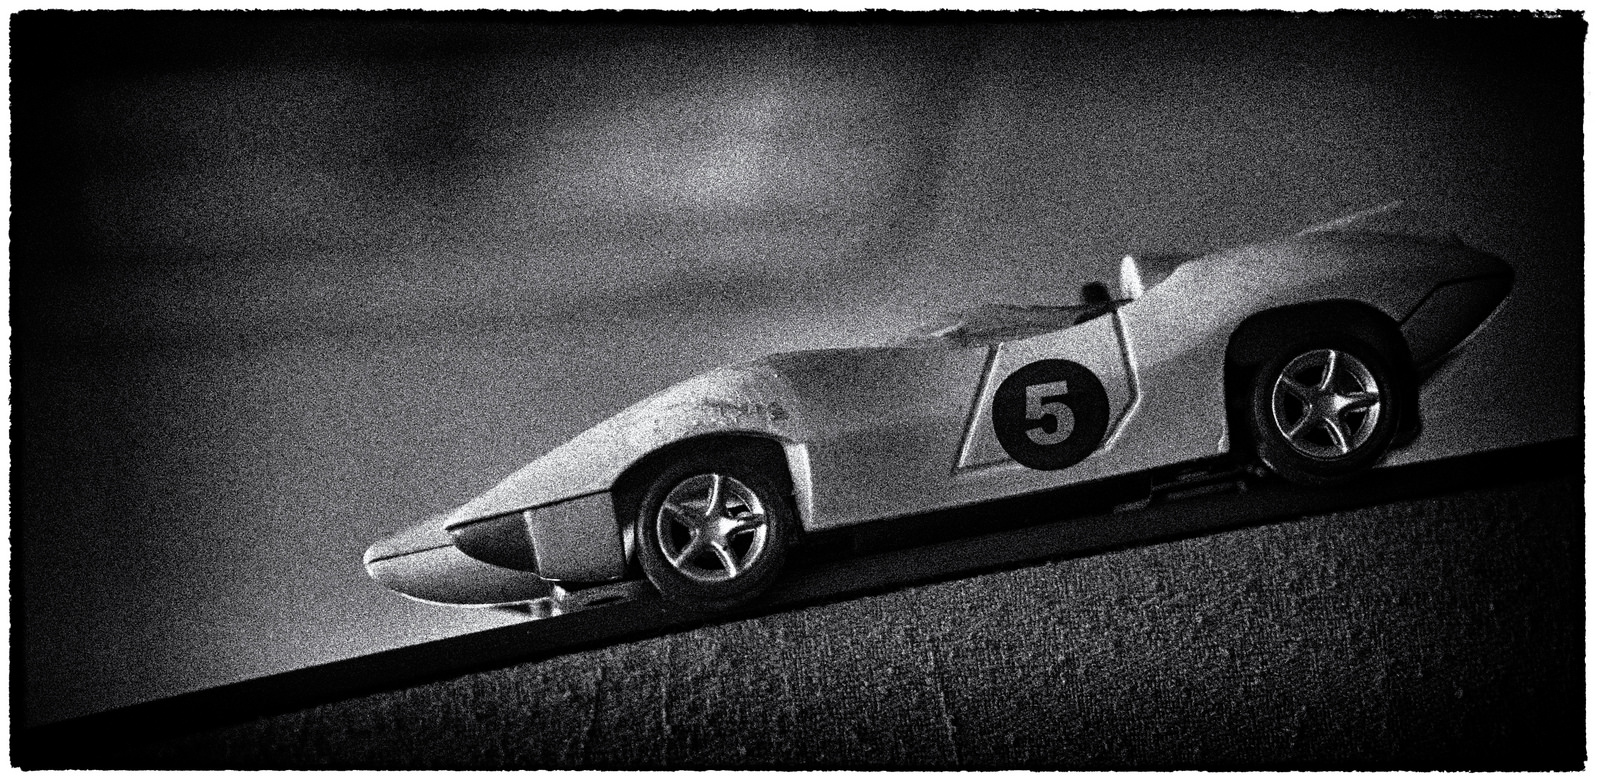 Black and white photo of a vintage toy race car.